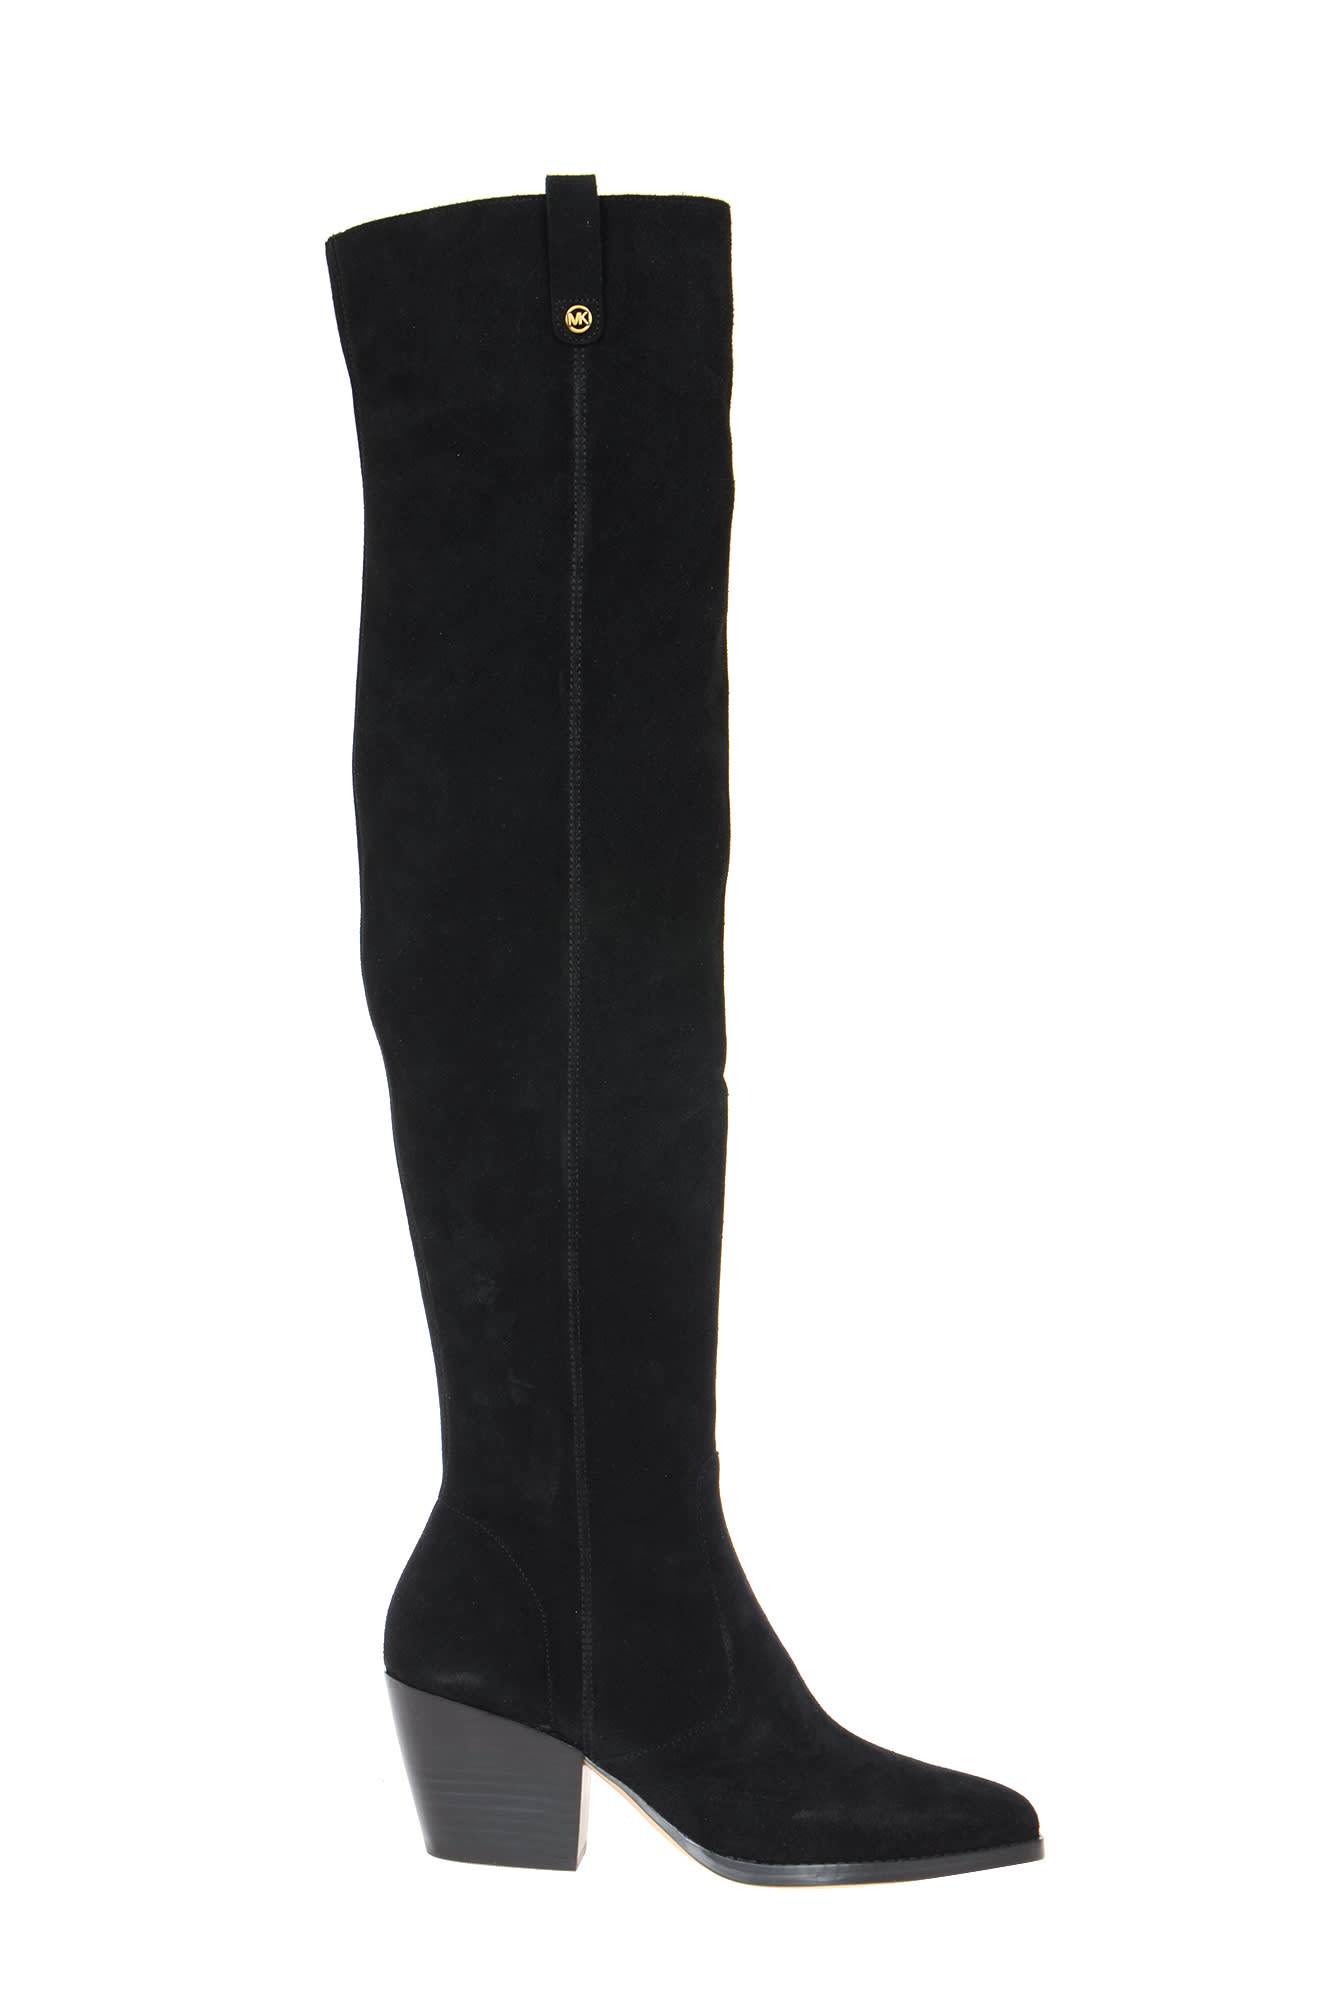 Michael Kors Harlow Over-the-knee Boots